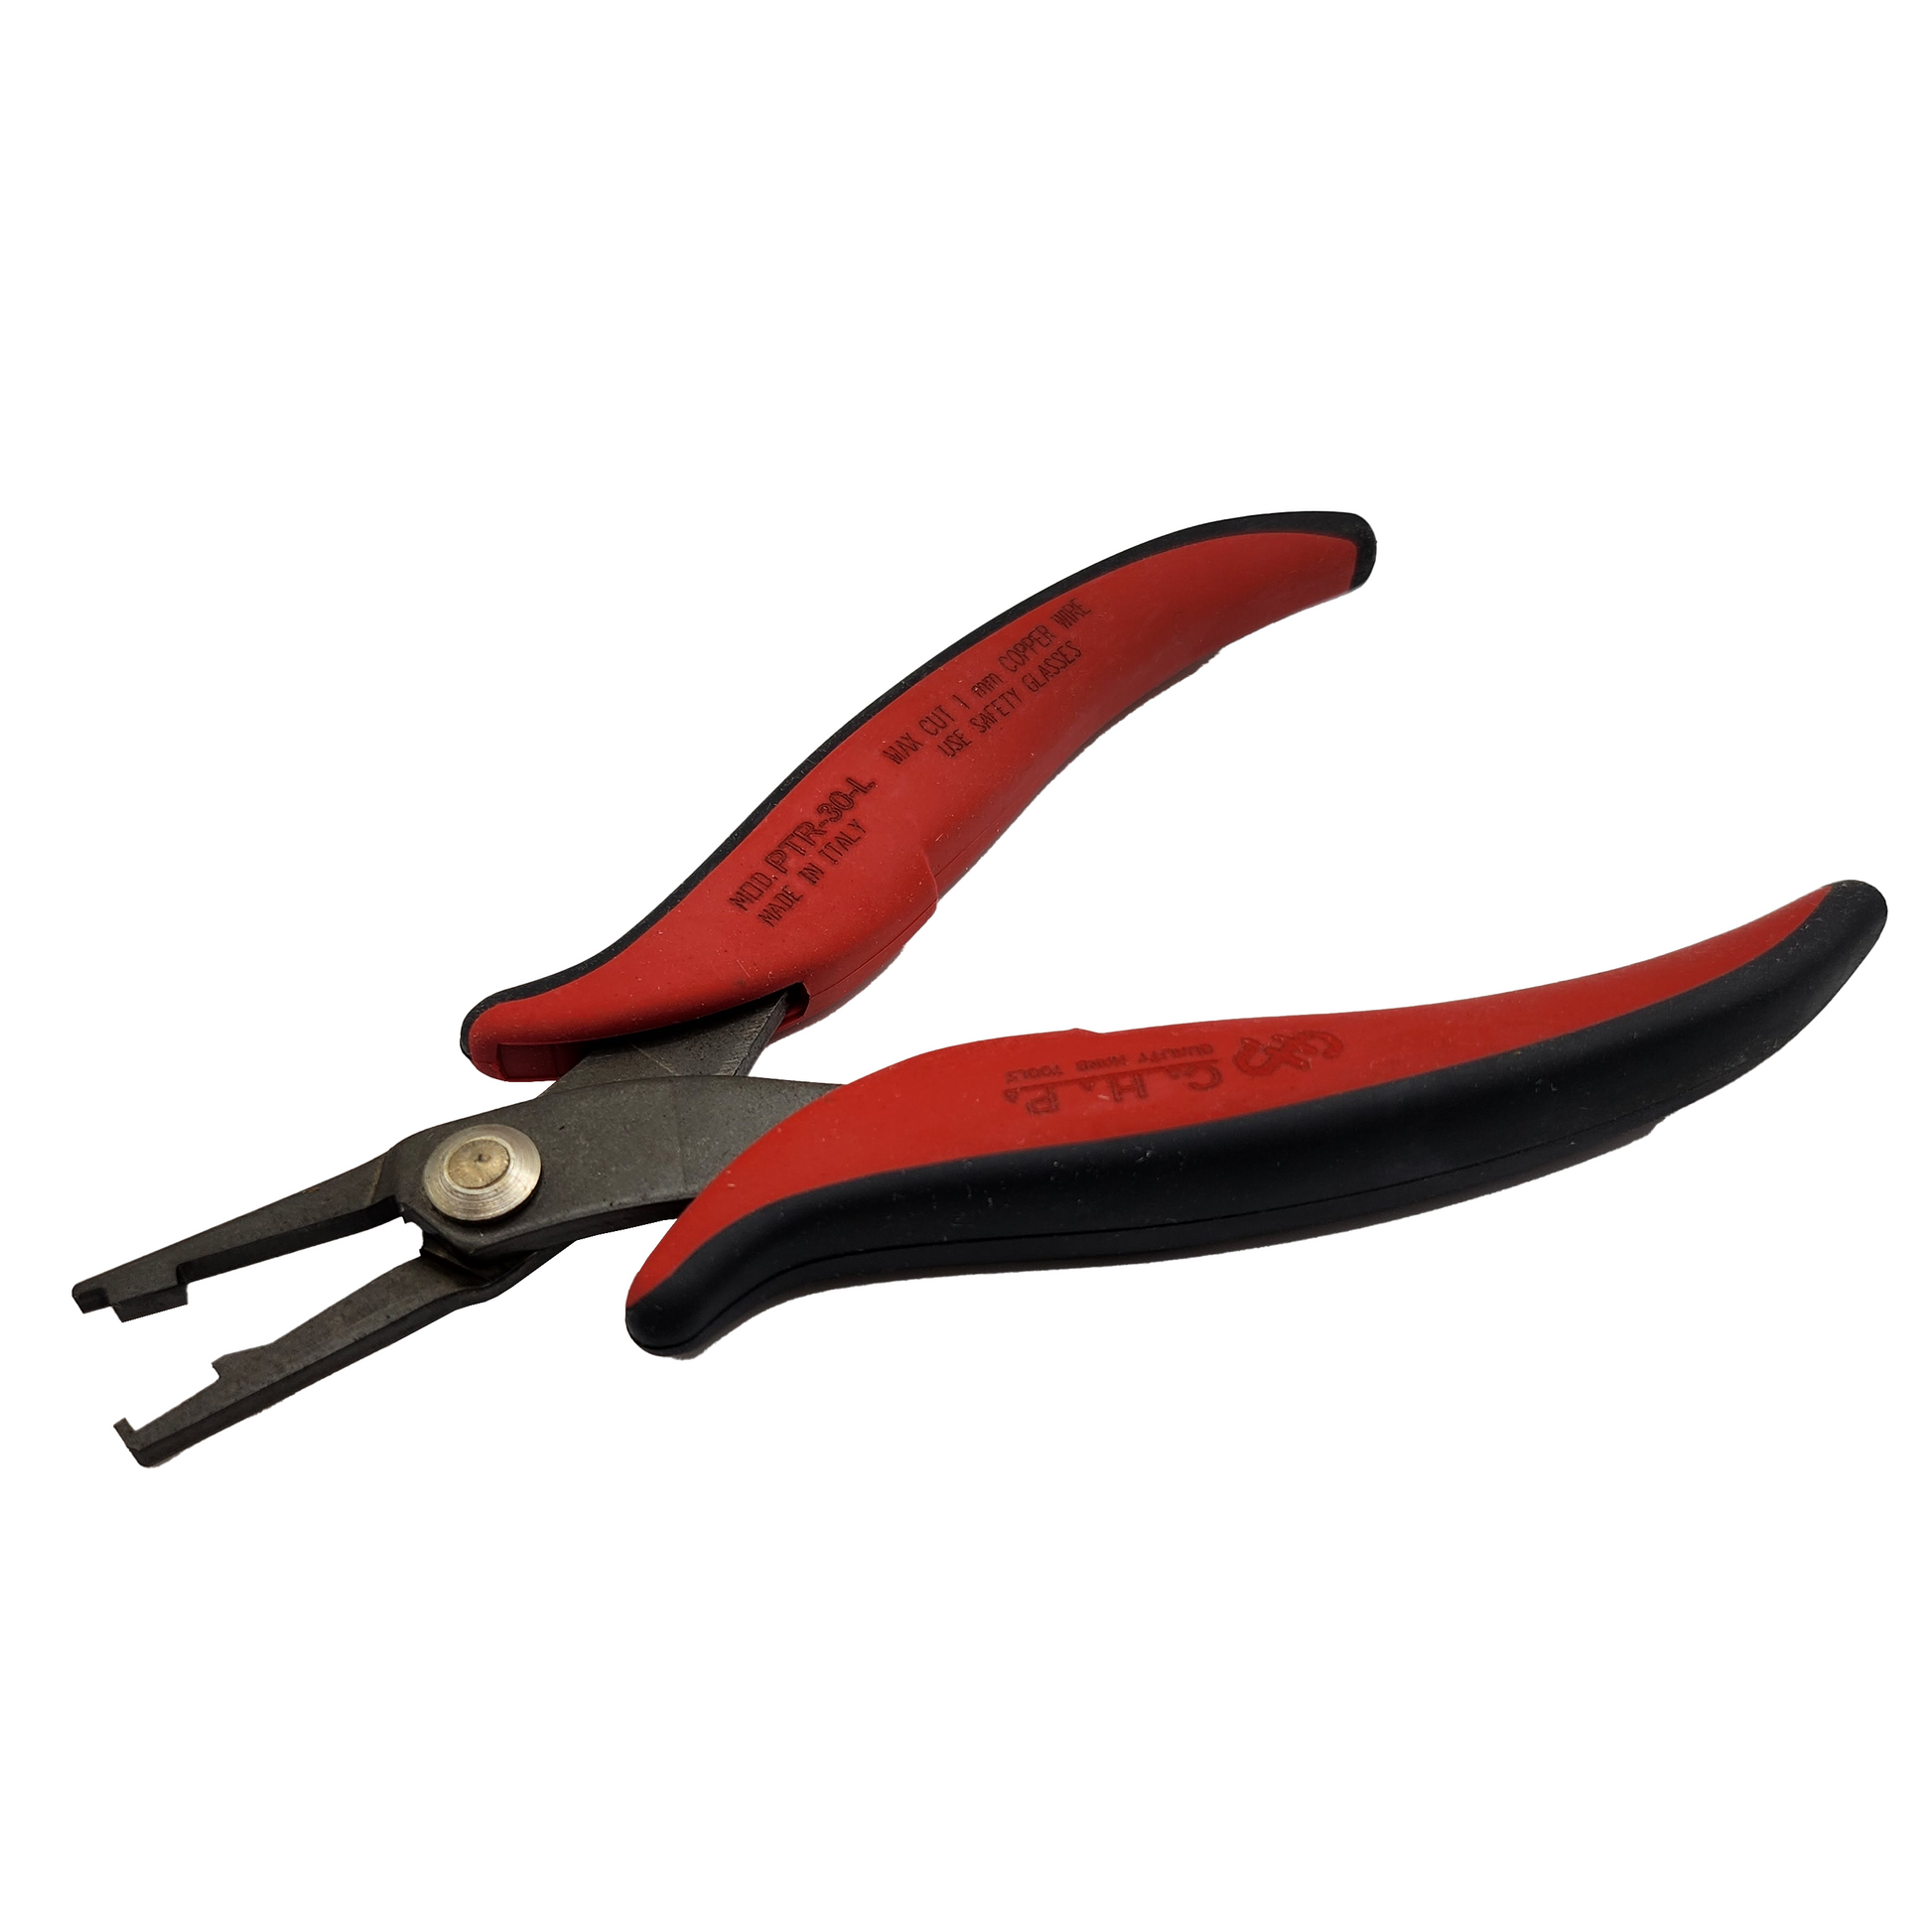 CHP_ CHP PTR-30-L Lead Forming Tool_ Cutters, Pliers, Multi-Tools_ Hakko Products